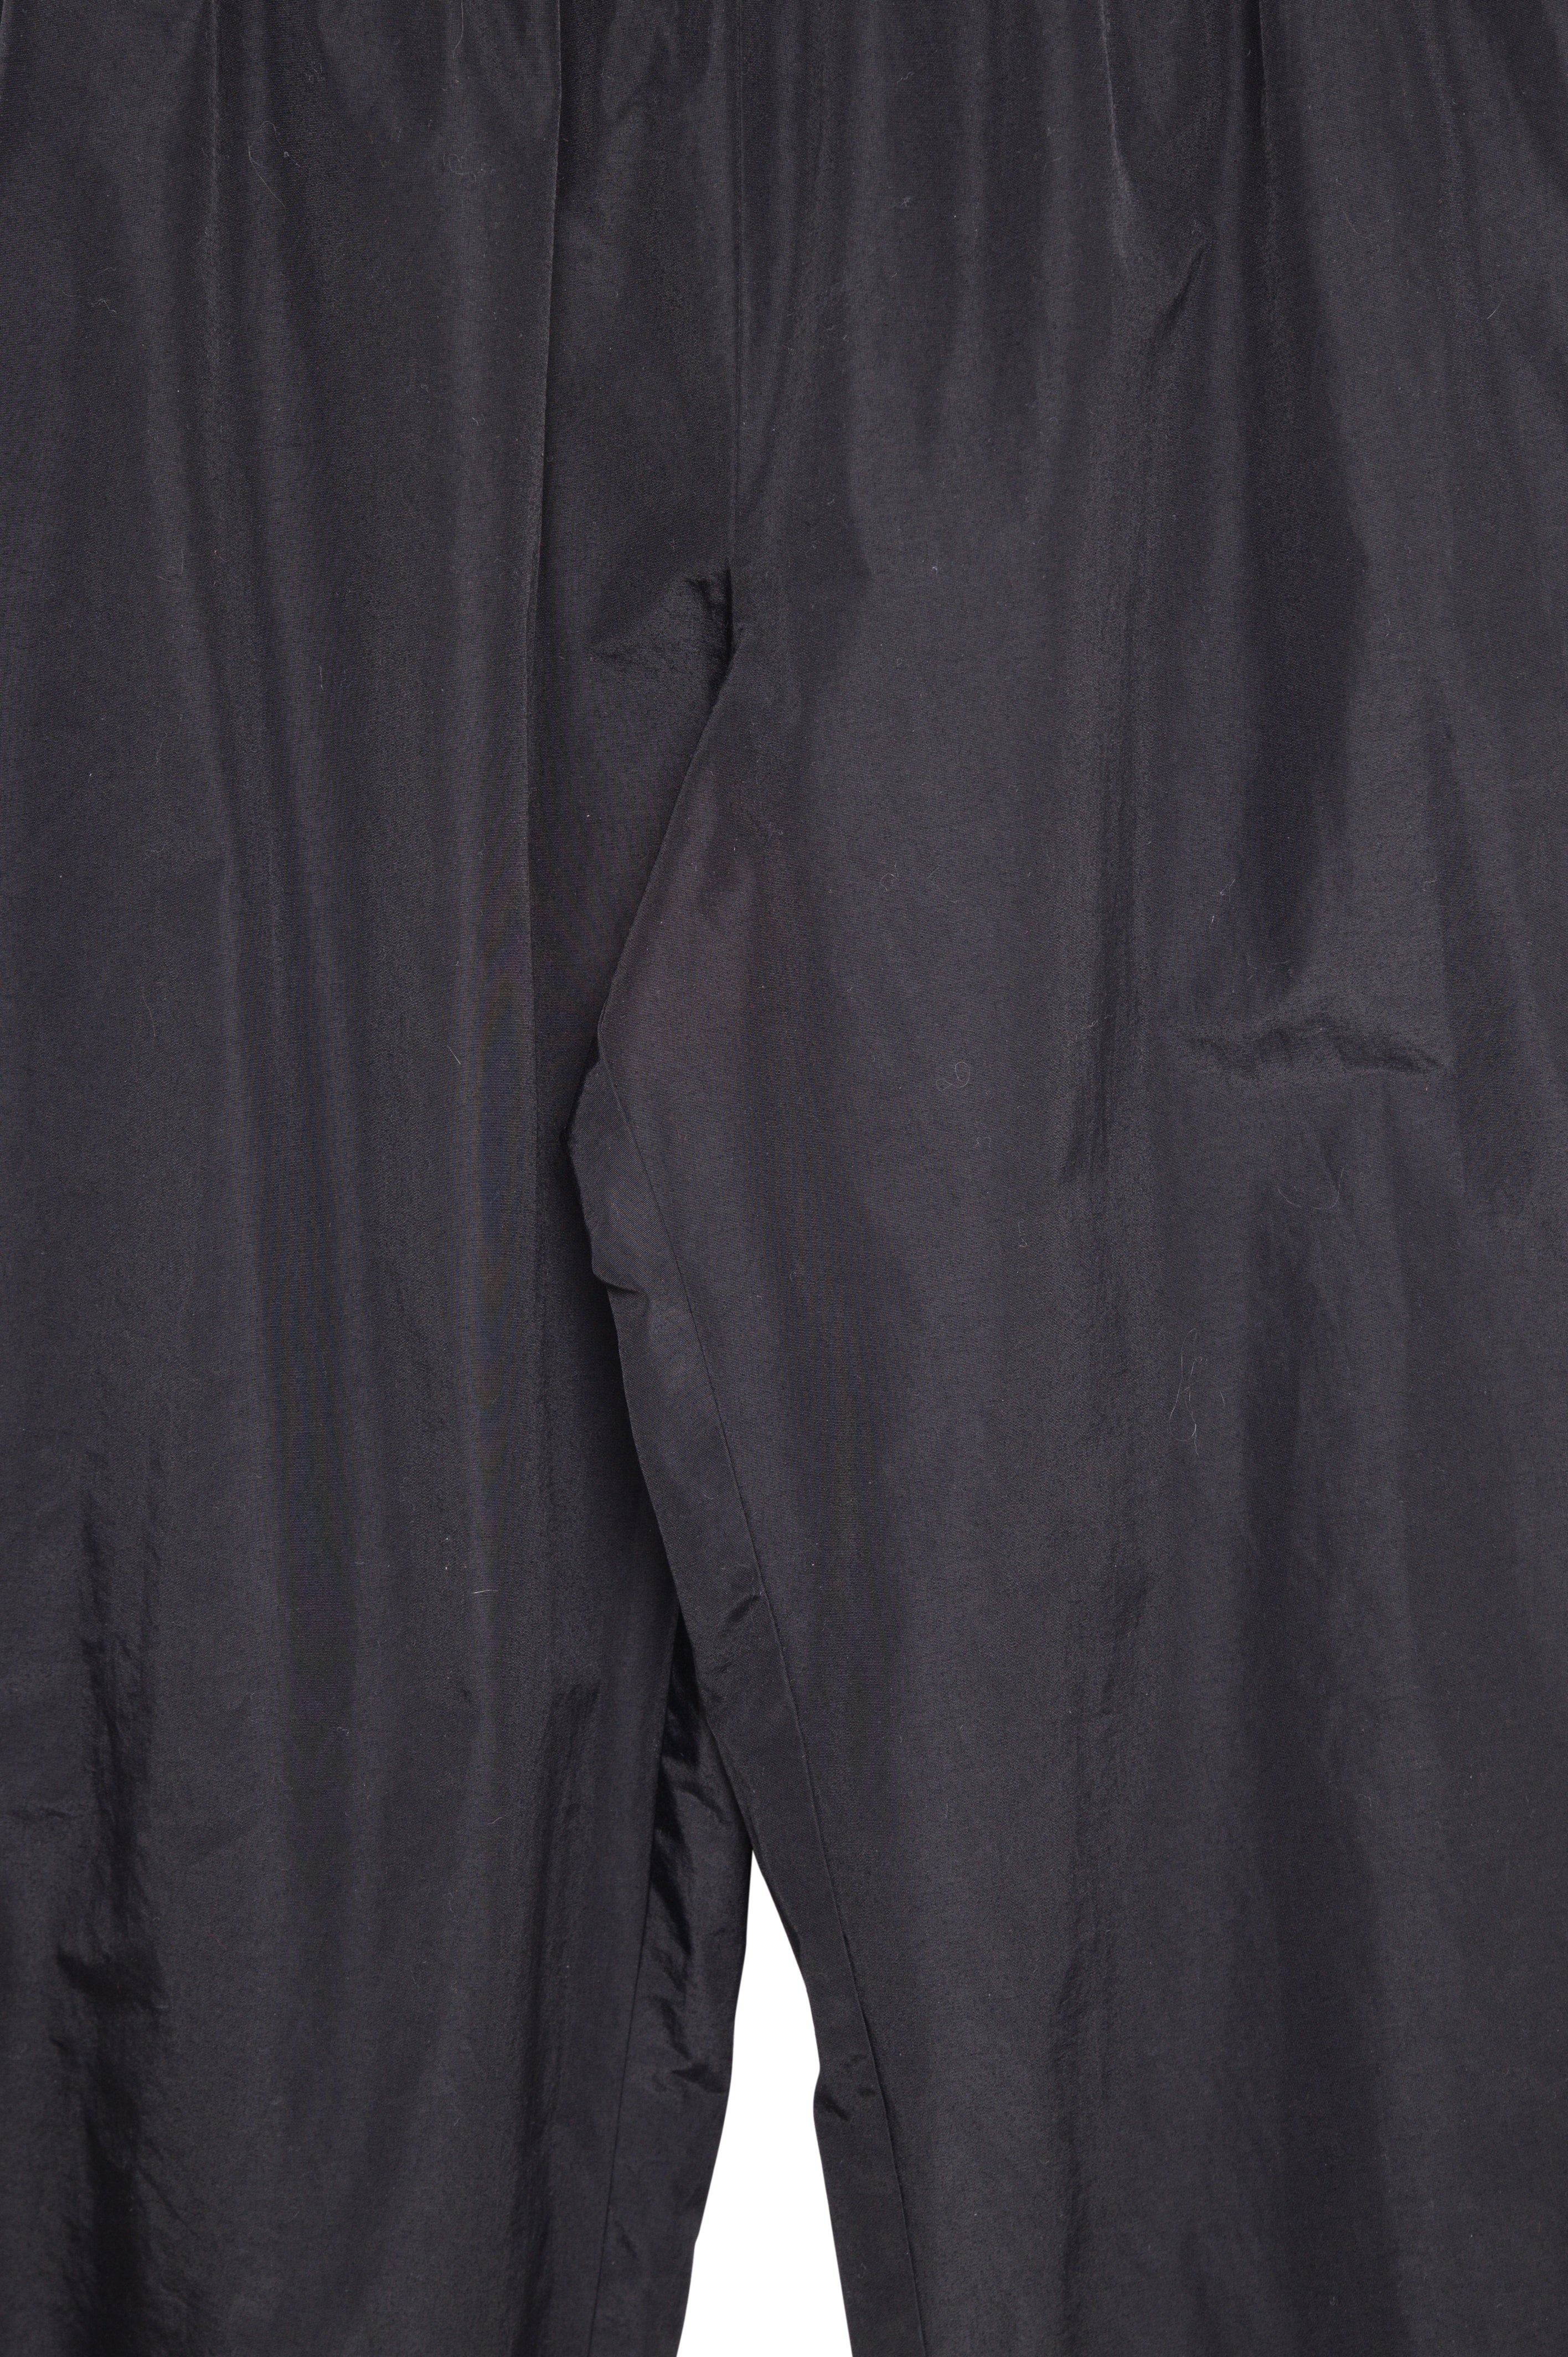 Buy Black Rapid Expedition Pant for Men Online at Columbia Sportswear |  480188